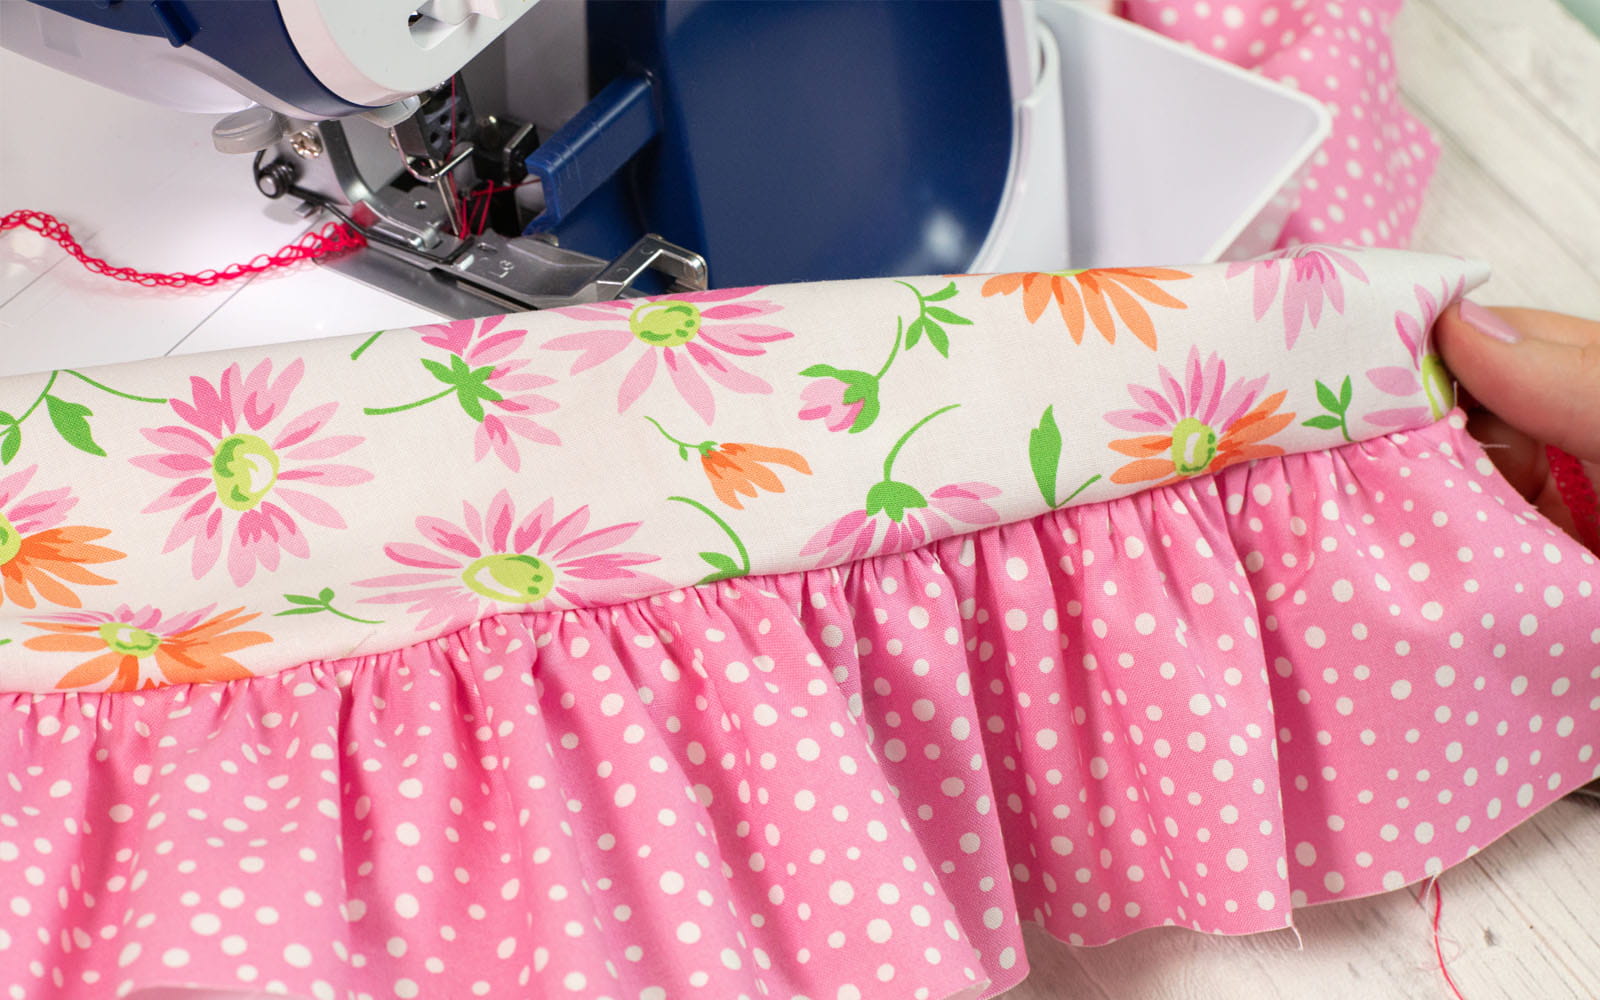 Pink fabric ruffle and floral fabric sewn together